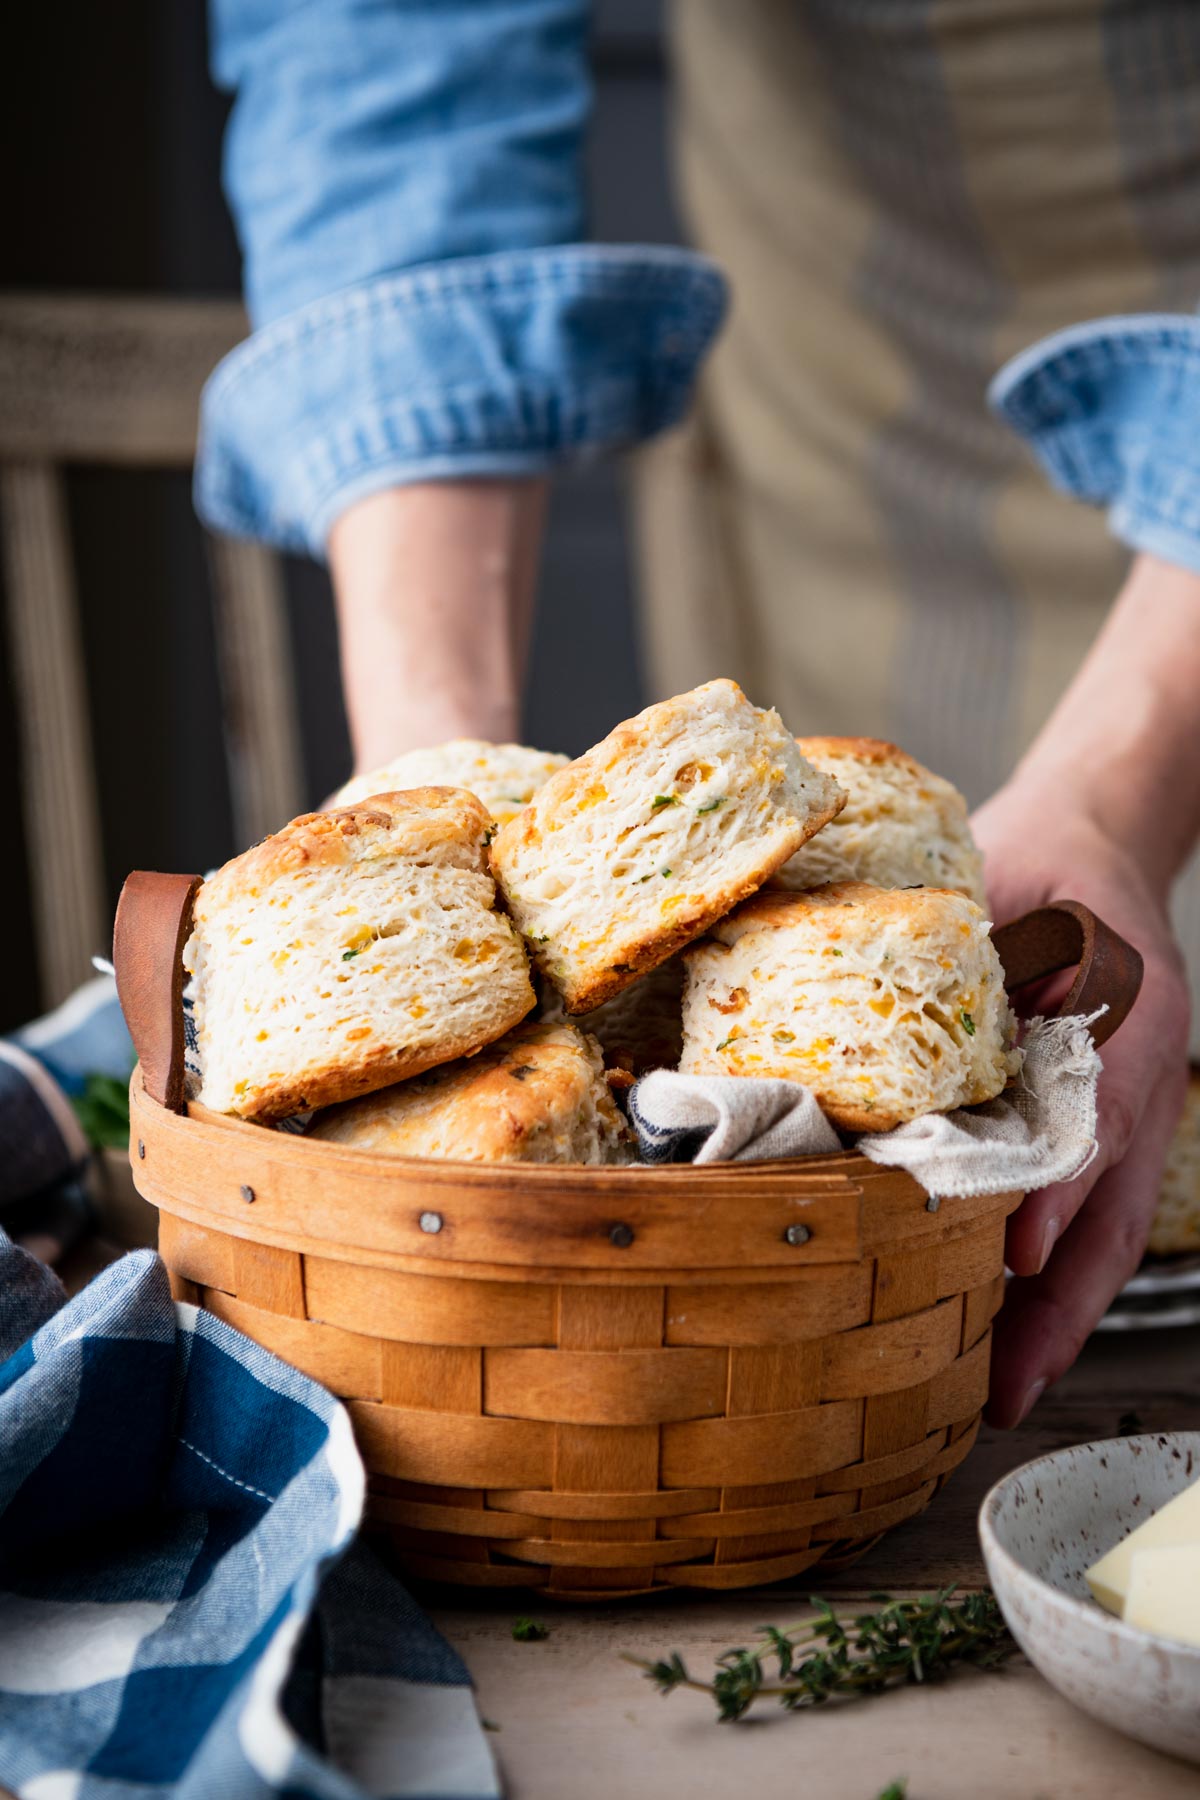 Hands serving a basket of cheddar biscuits with bacon and chives